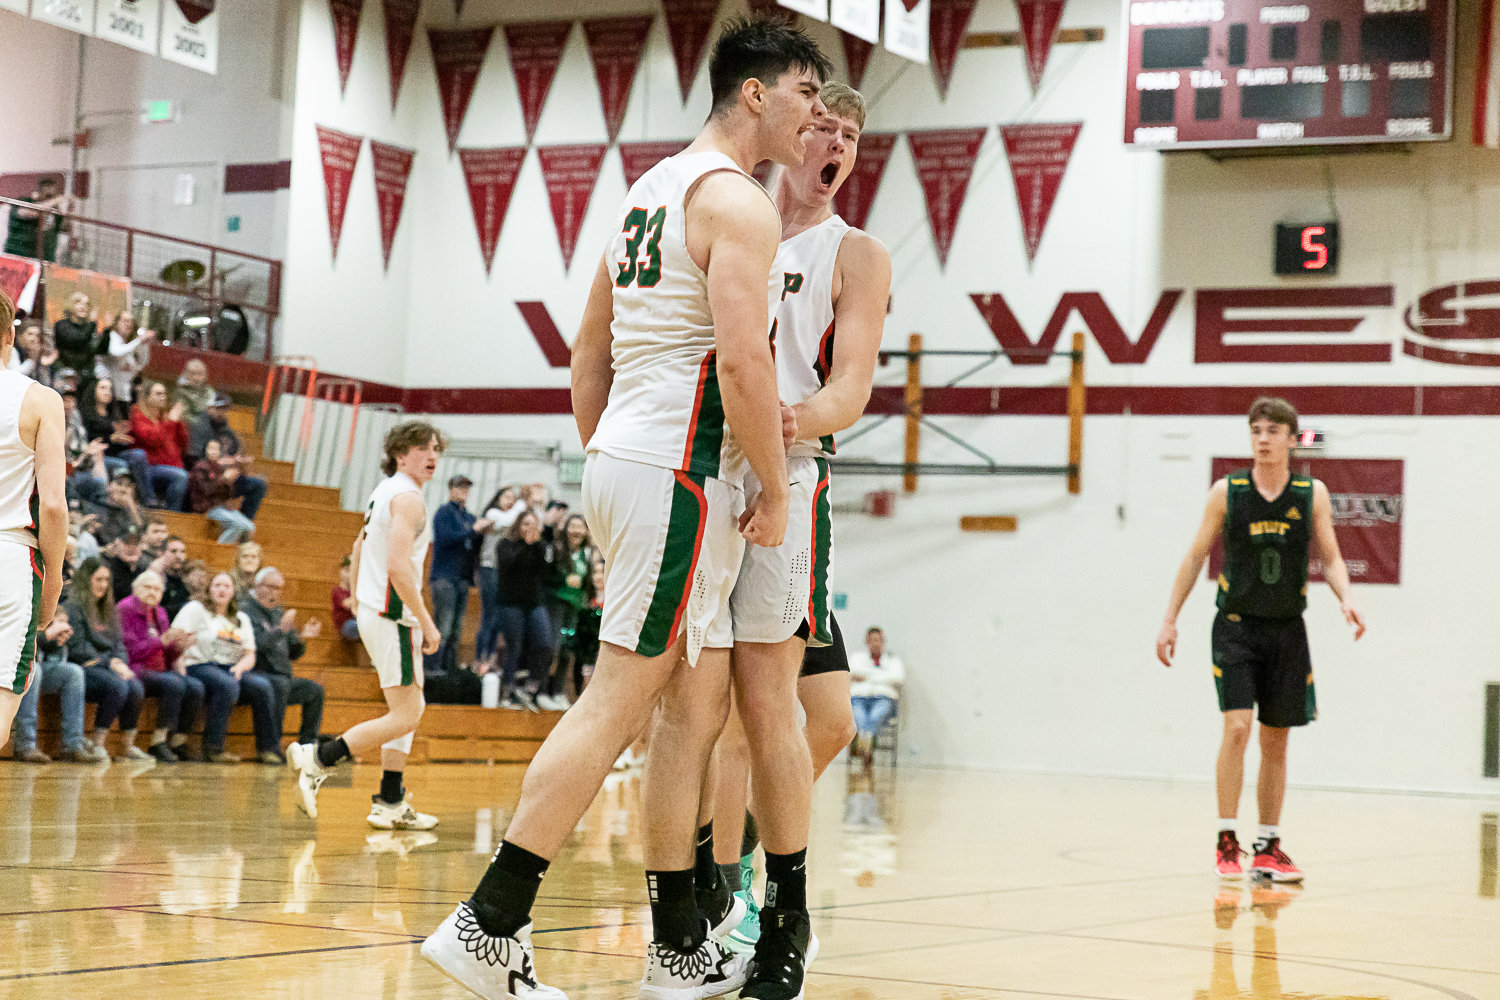 Morton-White Pass center Josh Salguero celebrates with teammate Jace Peters after an and-one in an opening round of state matchup against Northwest Christian (Colbert) at W.F. West Feb. 25.